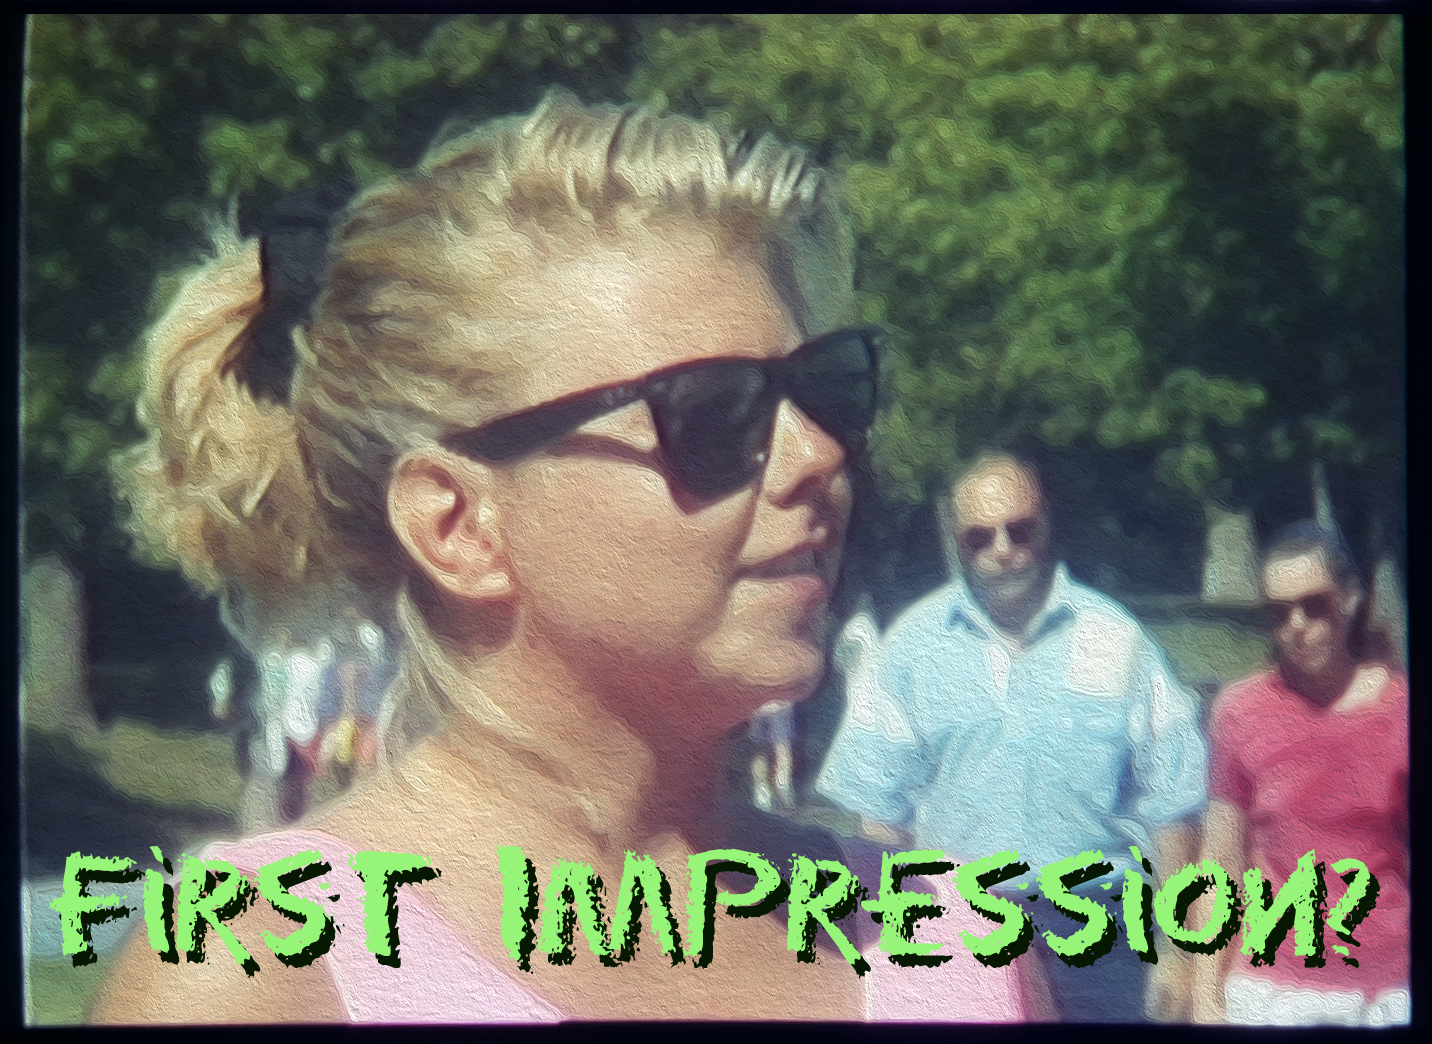 CANDID CONVERSATIONS 5: How Do You Make A Good First Impression?